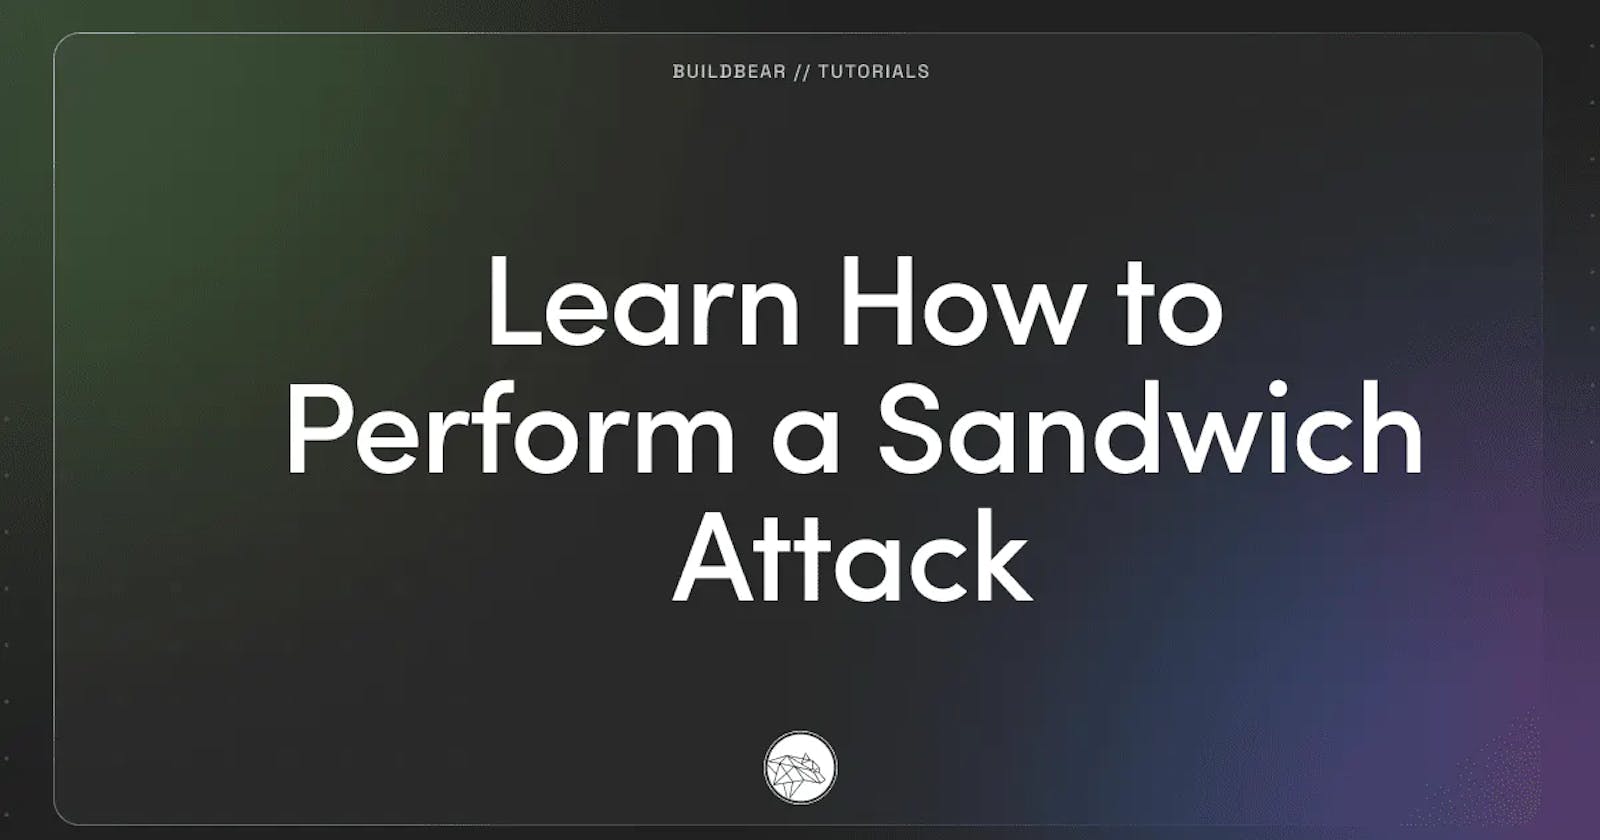 Learn How to Perform a Sandwich Attack